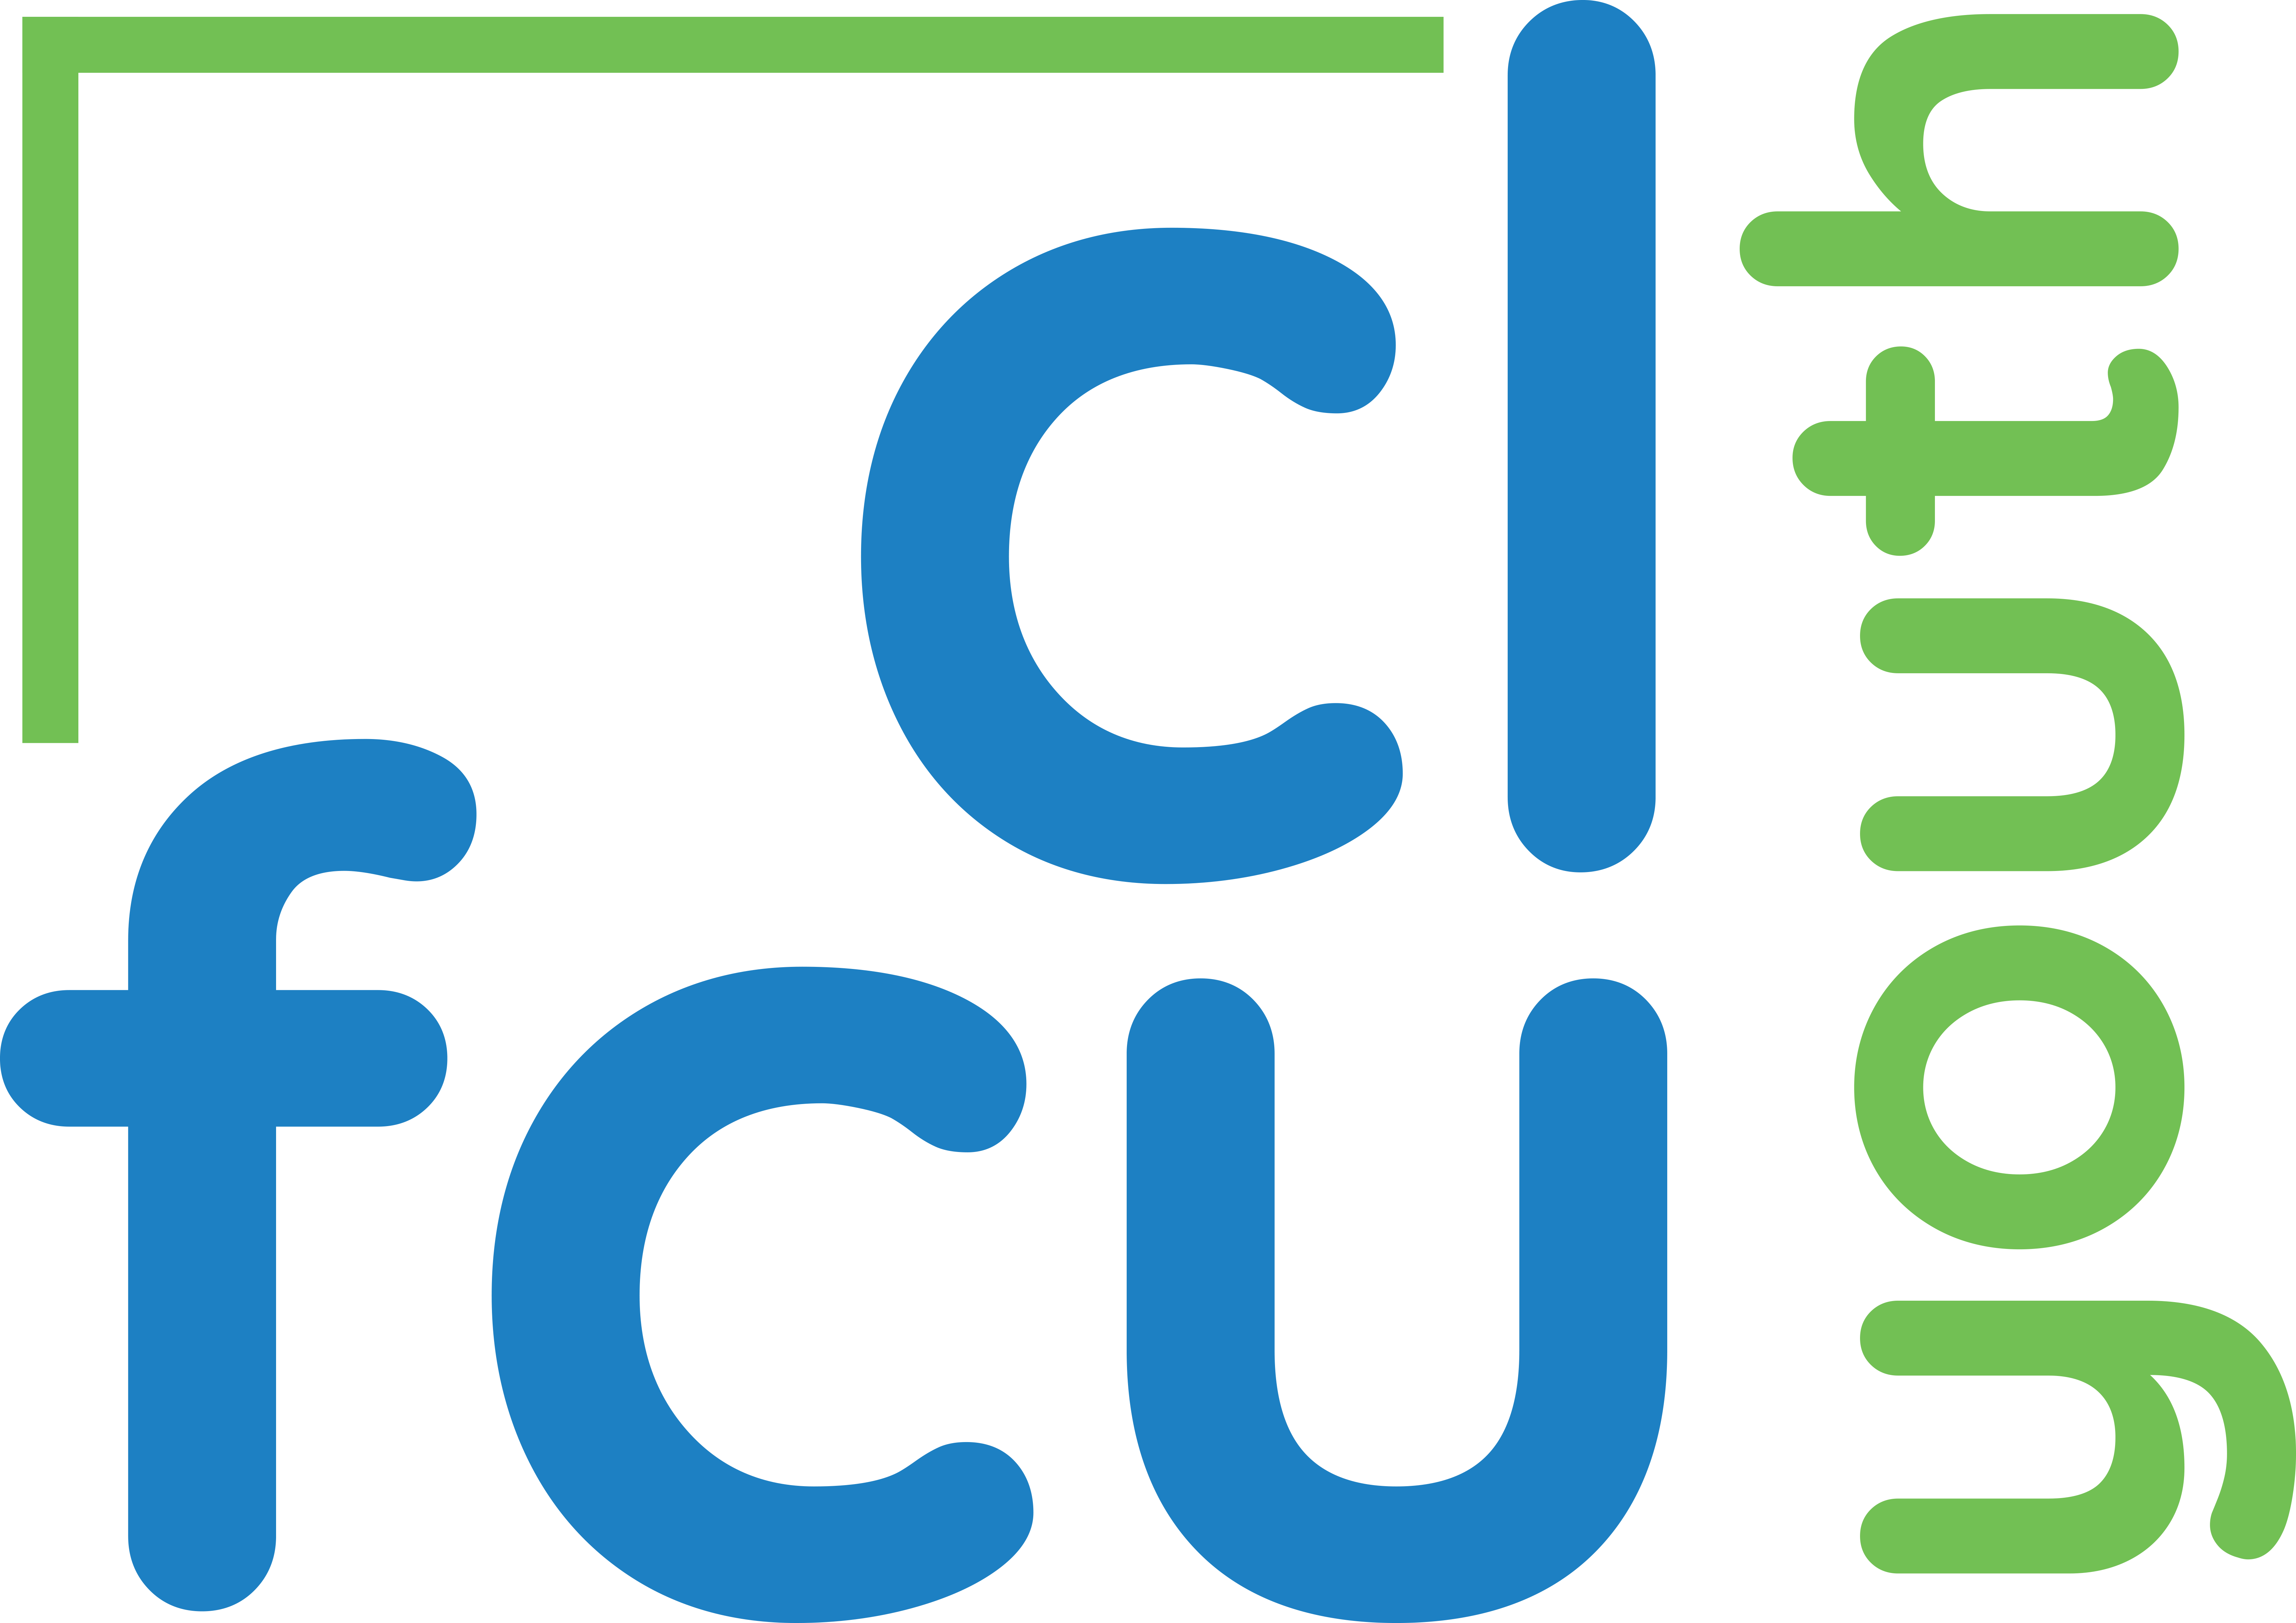 CLFCU youth logo - blue and green